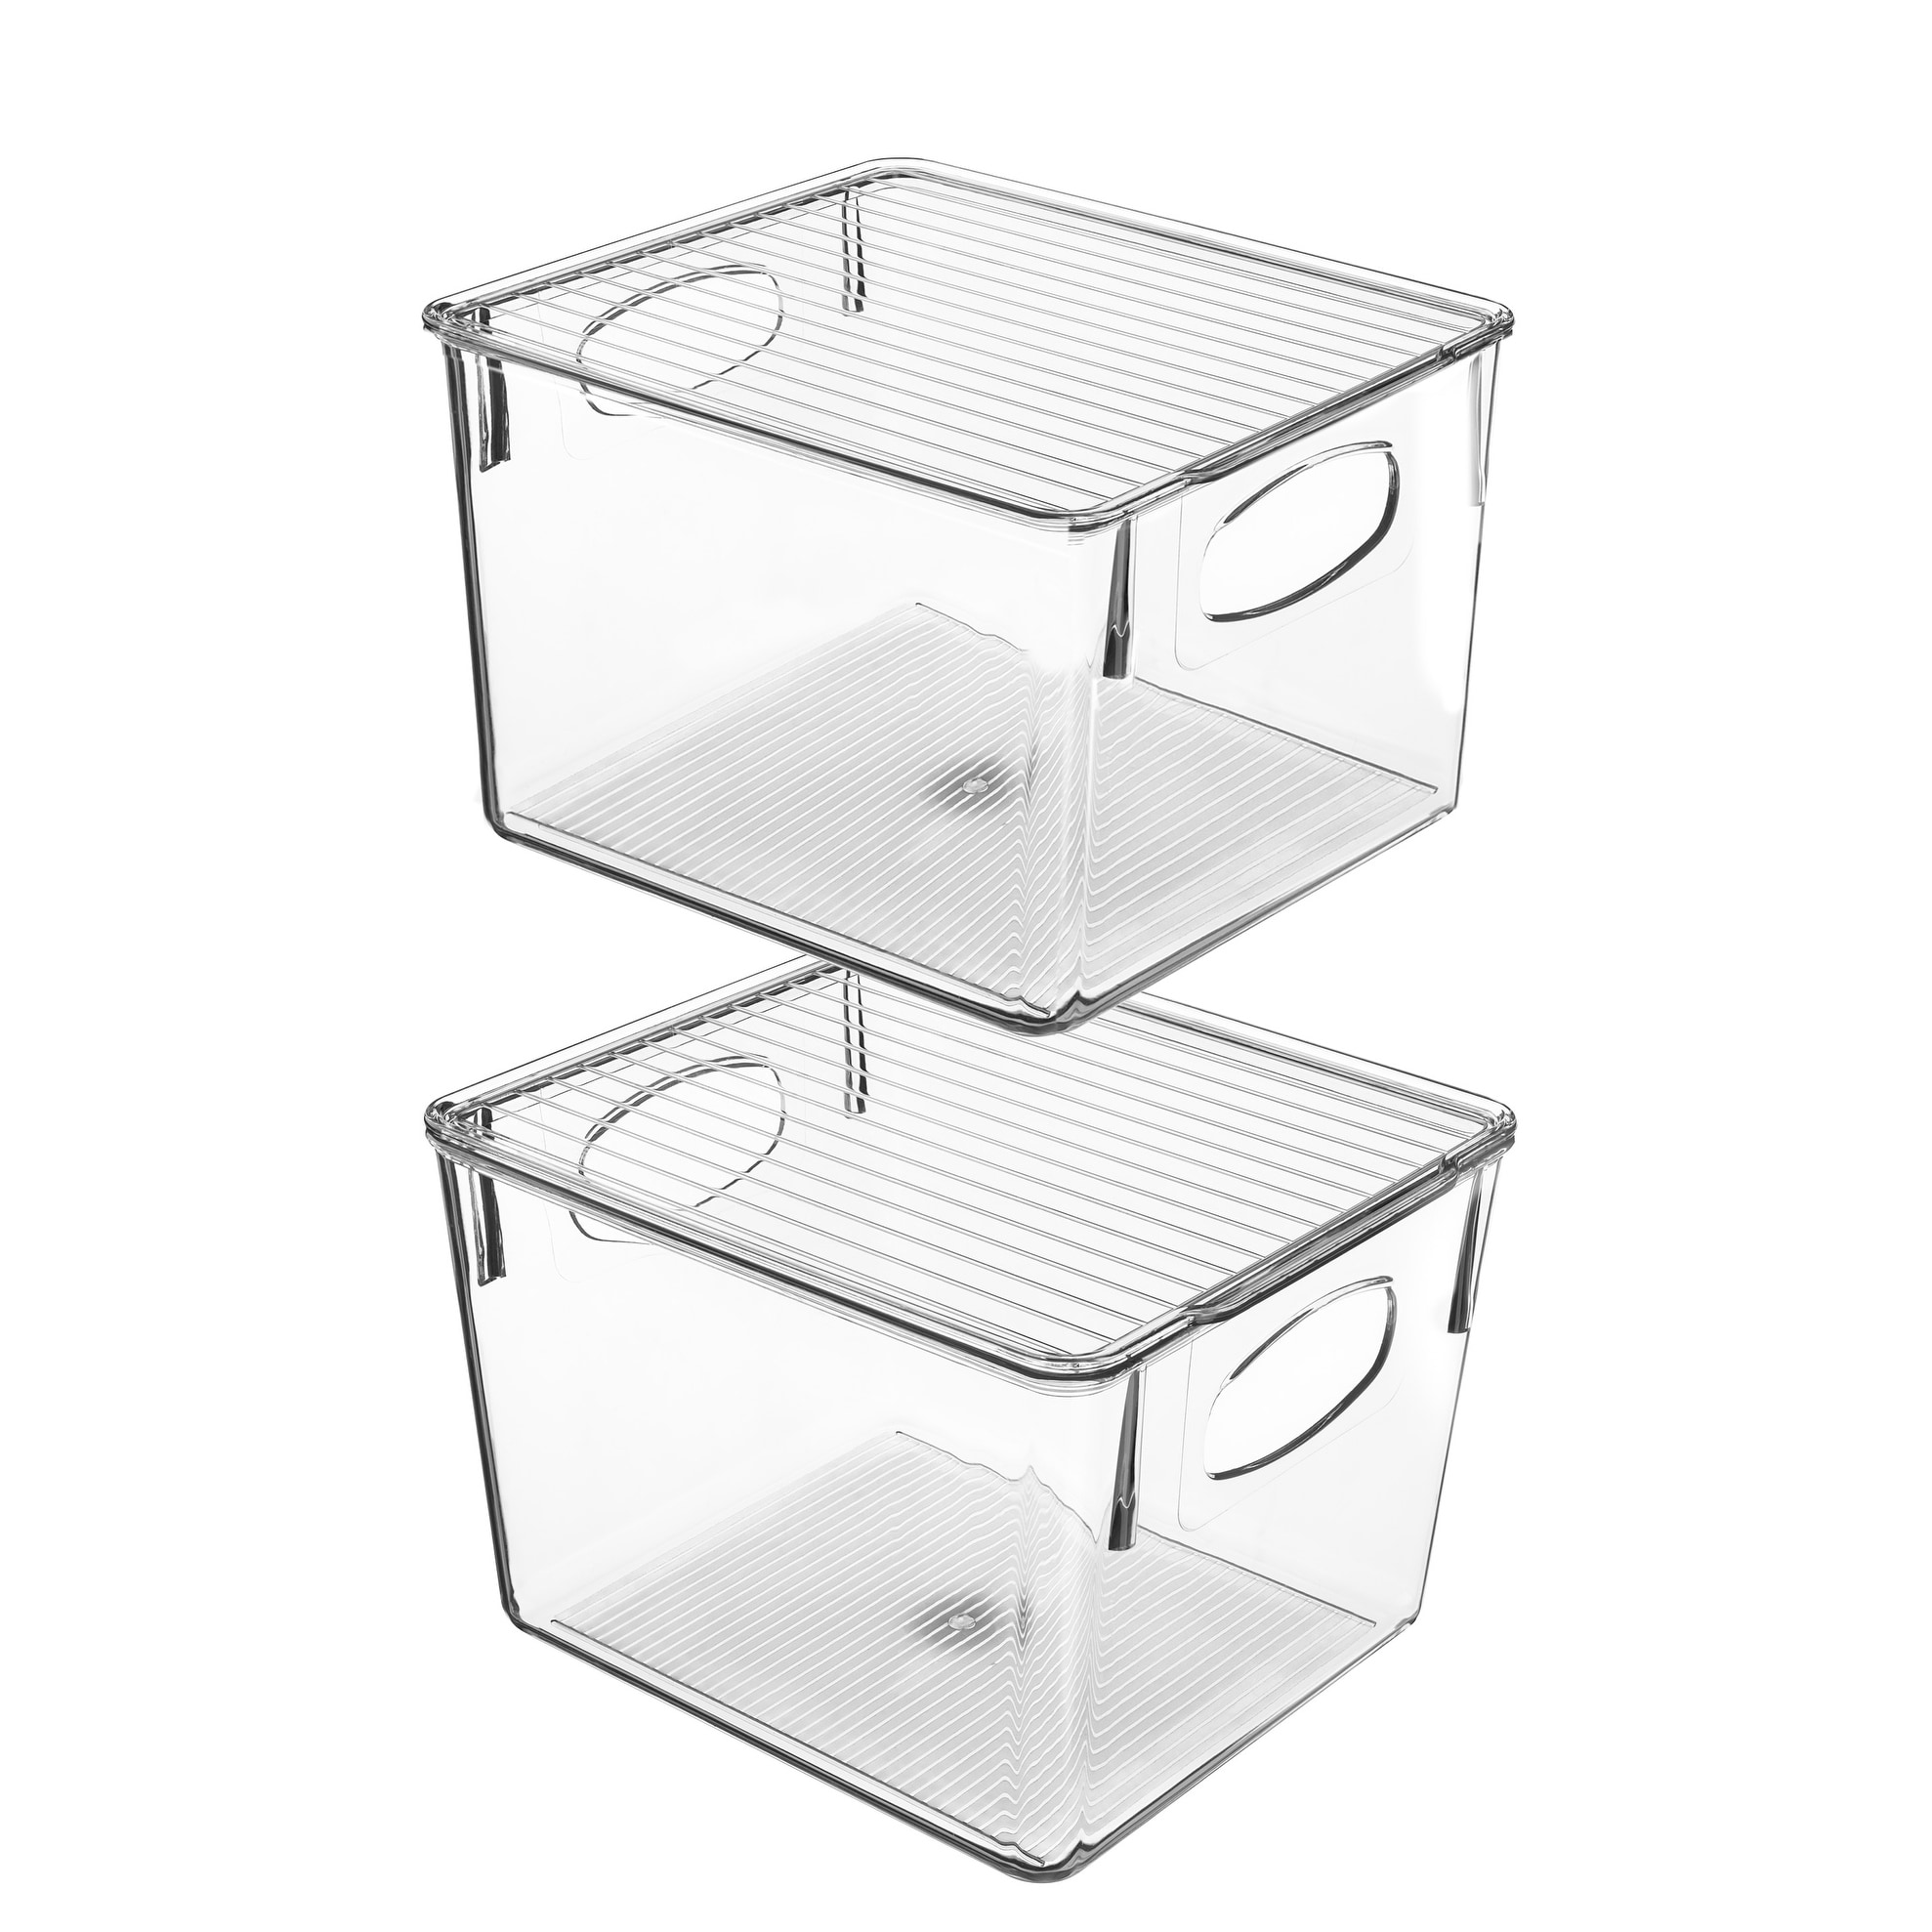 https://ak1.ostkcdn.com/images/products/is/images/direct/7d9792ebeceb5ce800891eb08cfb07762bb5e617/Stackable-Fridge-Freezer-Bins-Organizer-w-Lid-Food-Storage-Containers.jpg